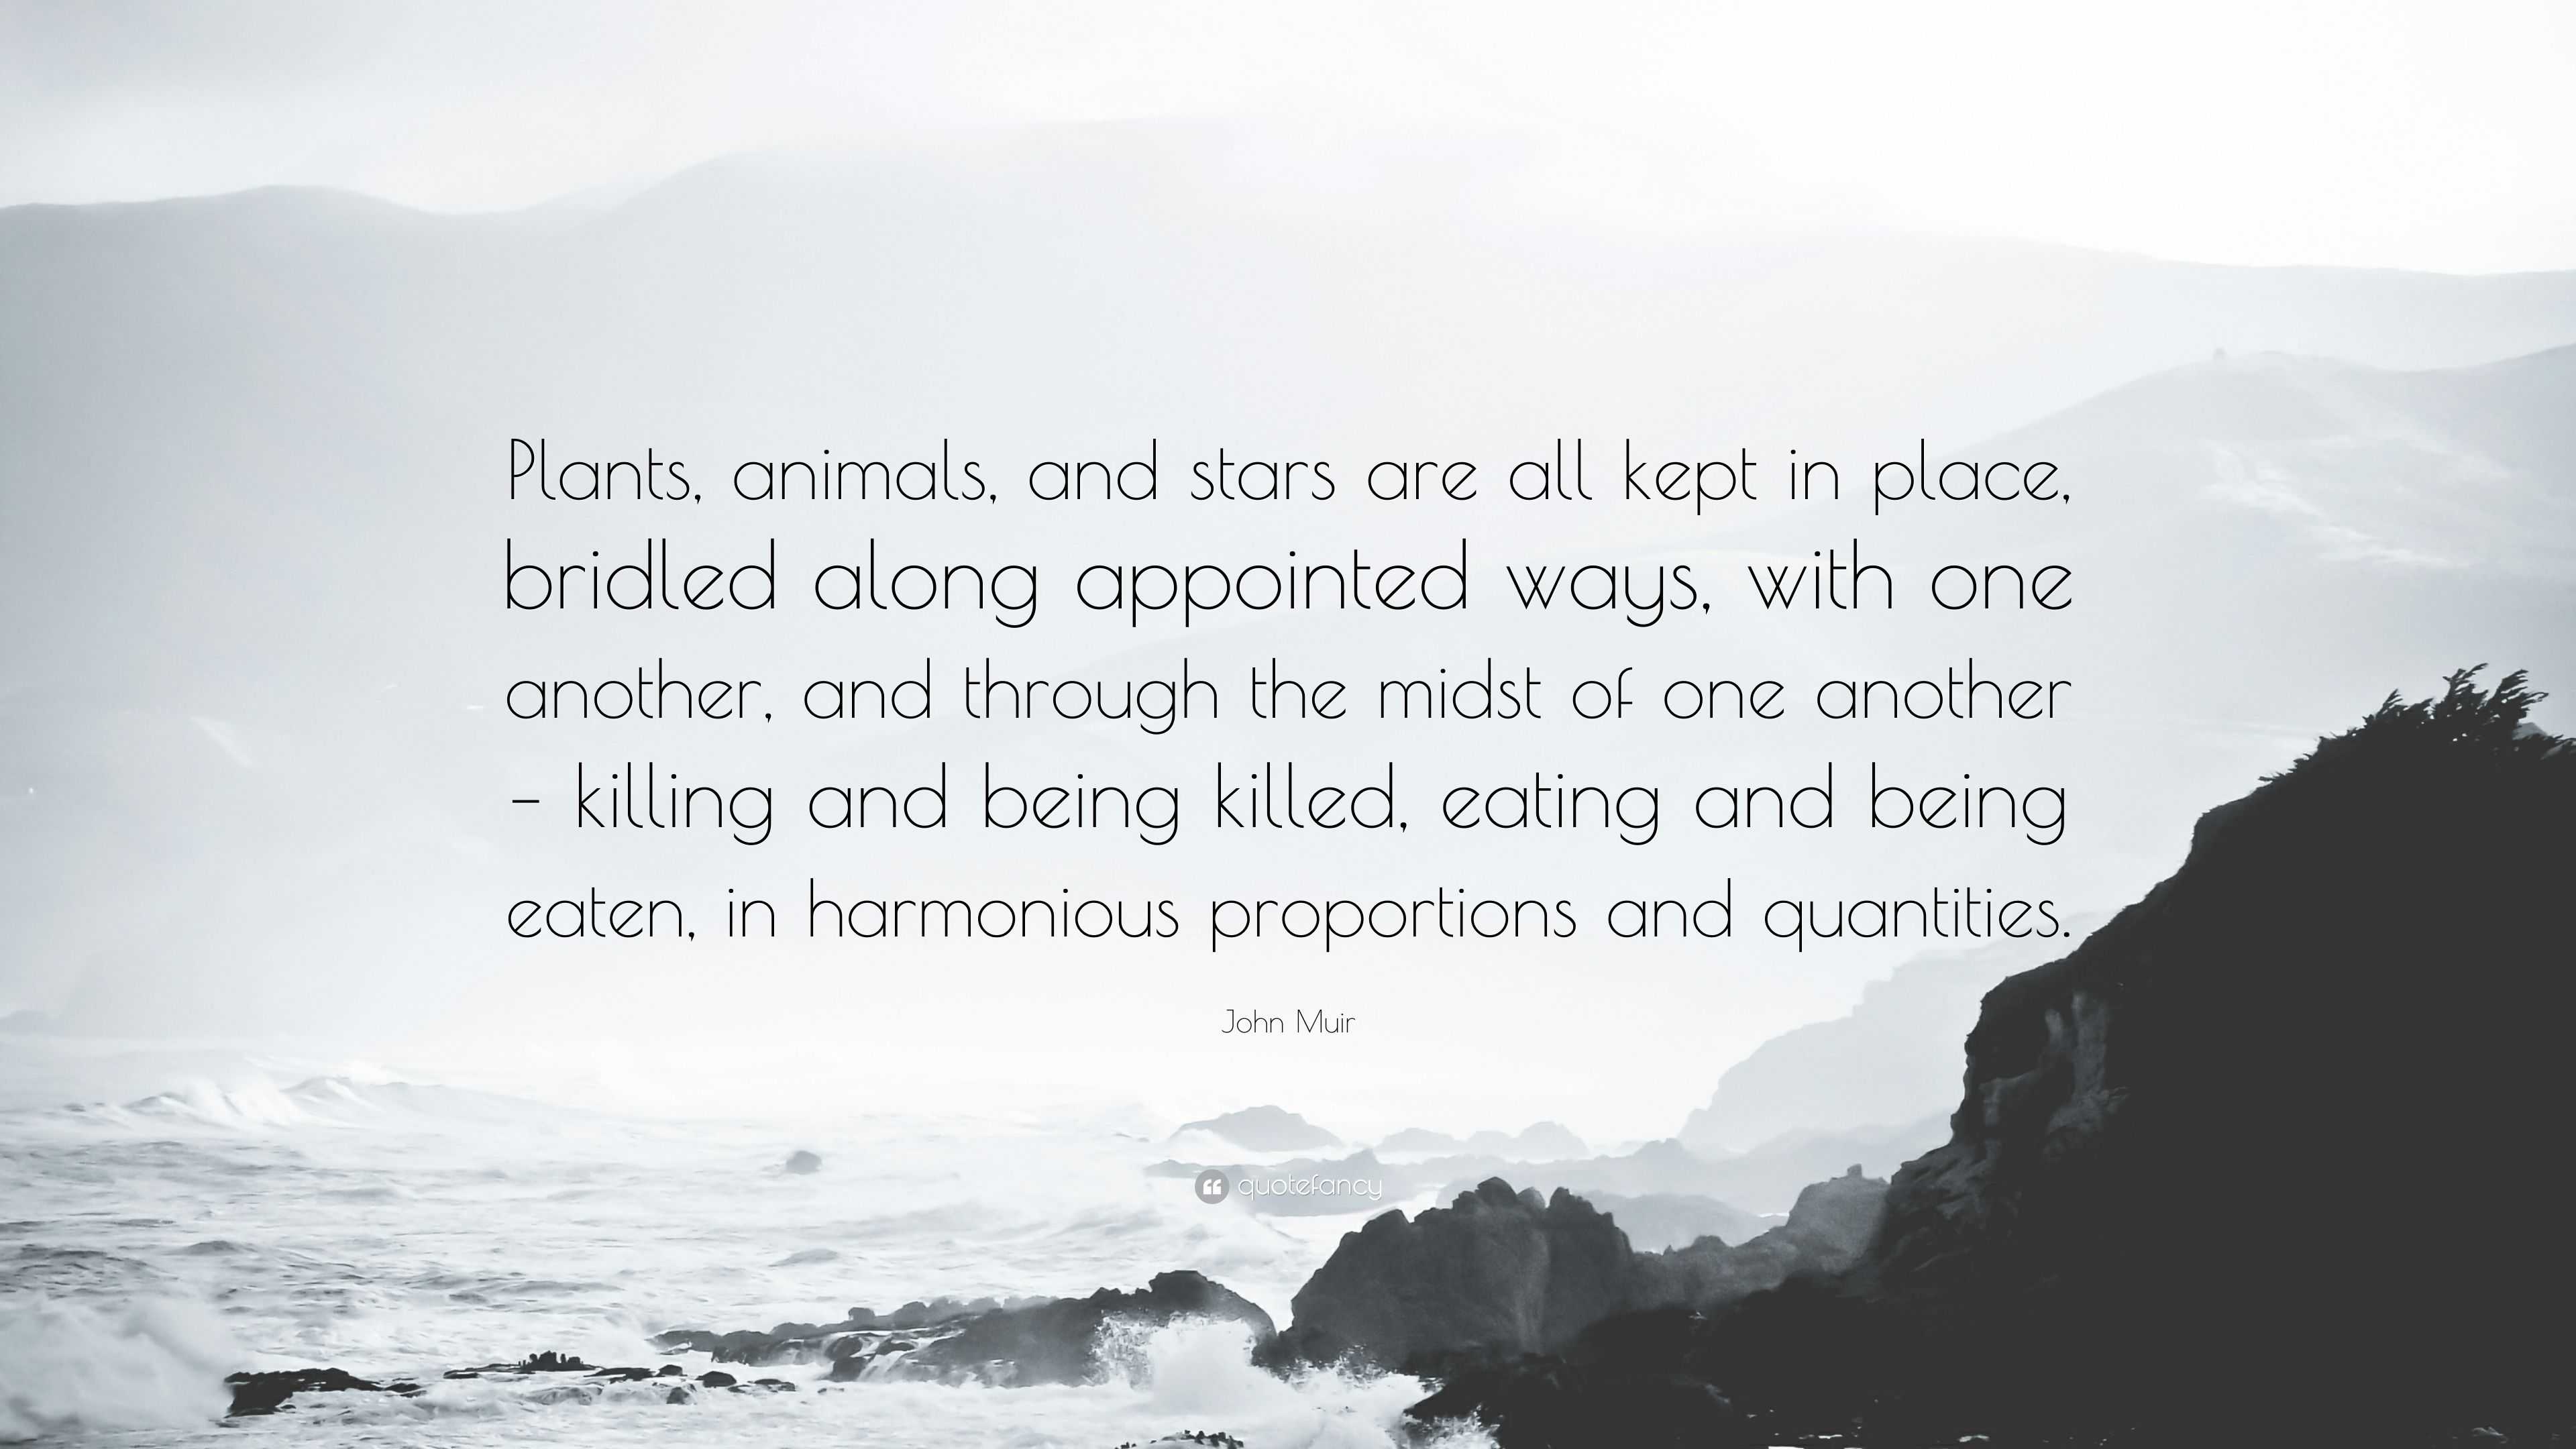 John Muir Quote: “Plants, animals, and stars are all kept in place, bridled  along appointed ways, with one another, and through the midst ...”